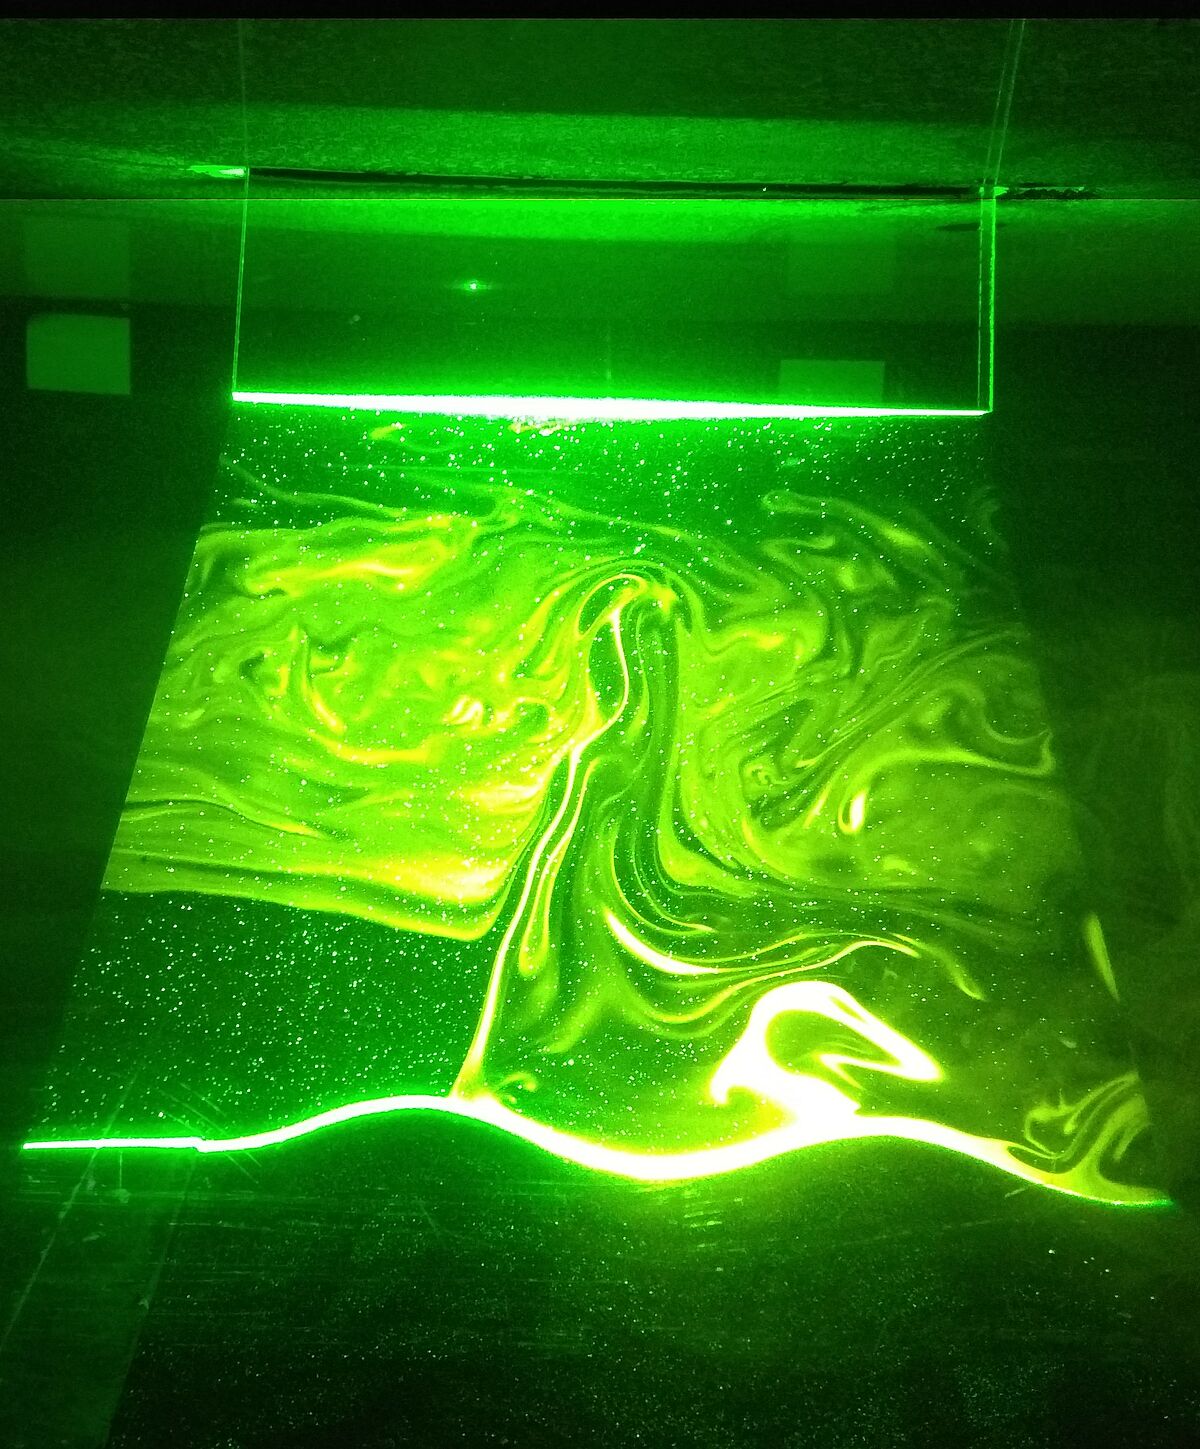 Measurement of flow and tracer distribution using PIV (particles) and PLIF (fluorescent dye)